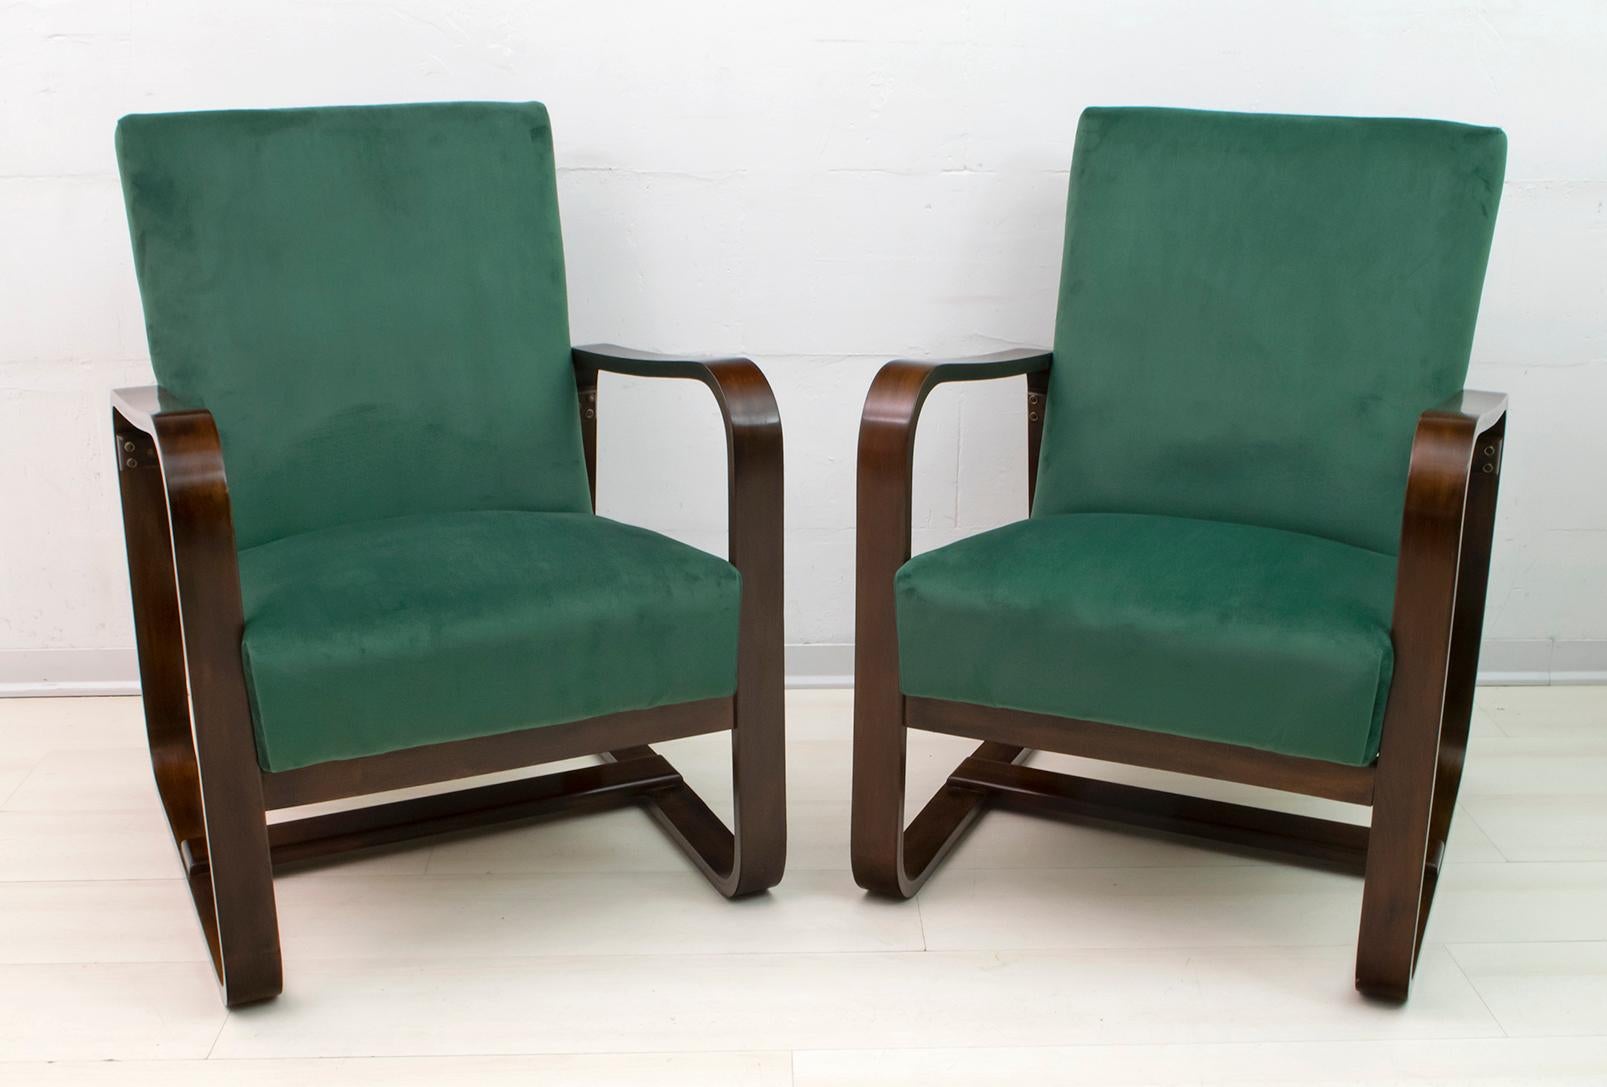 Elegant set of two Art Deco armchairs, designed by Giuseppe Pagano Pogatschnig & Gino Maggioni, made in 1939 for the Bocconi University of Milan. The armchairs have been restored and covered in velvet.

Giuseppe Pagano (August 1896 - April 1945)